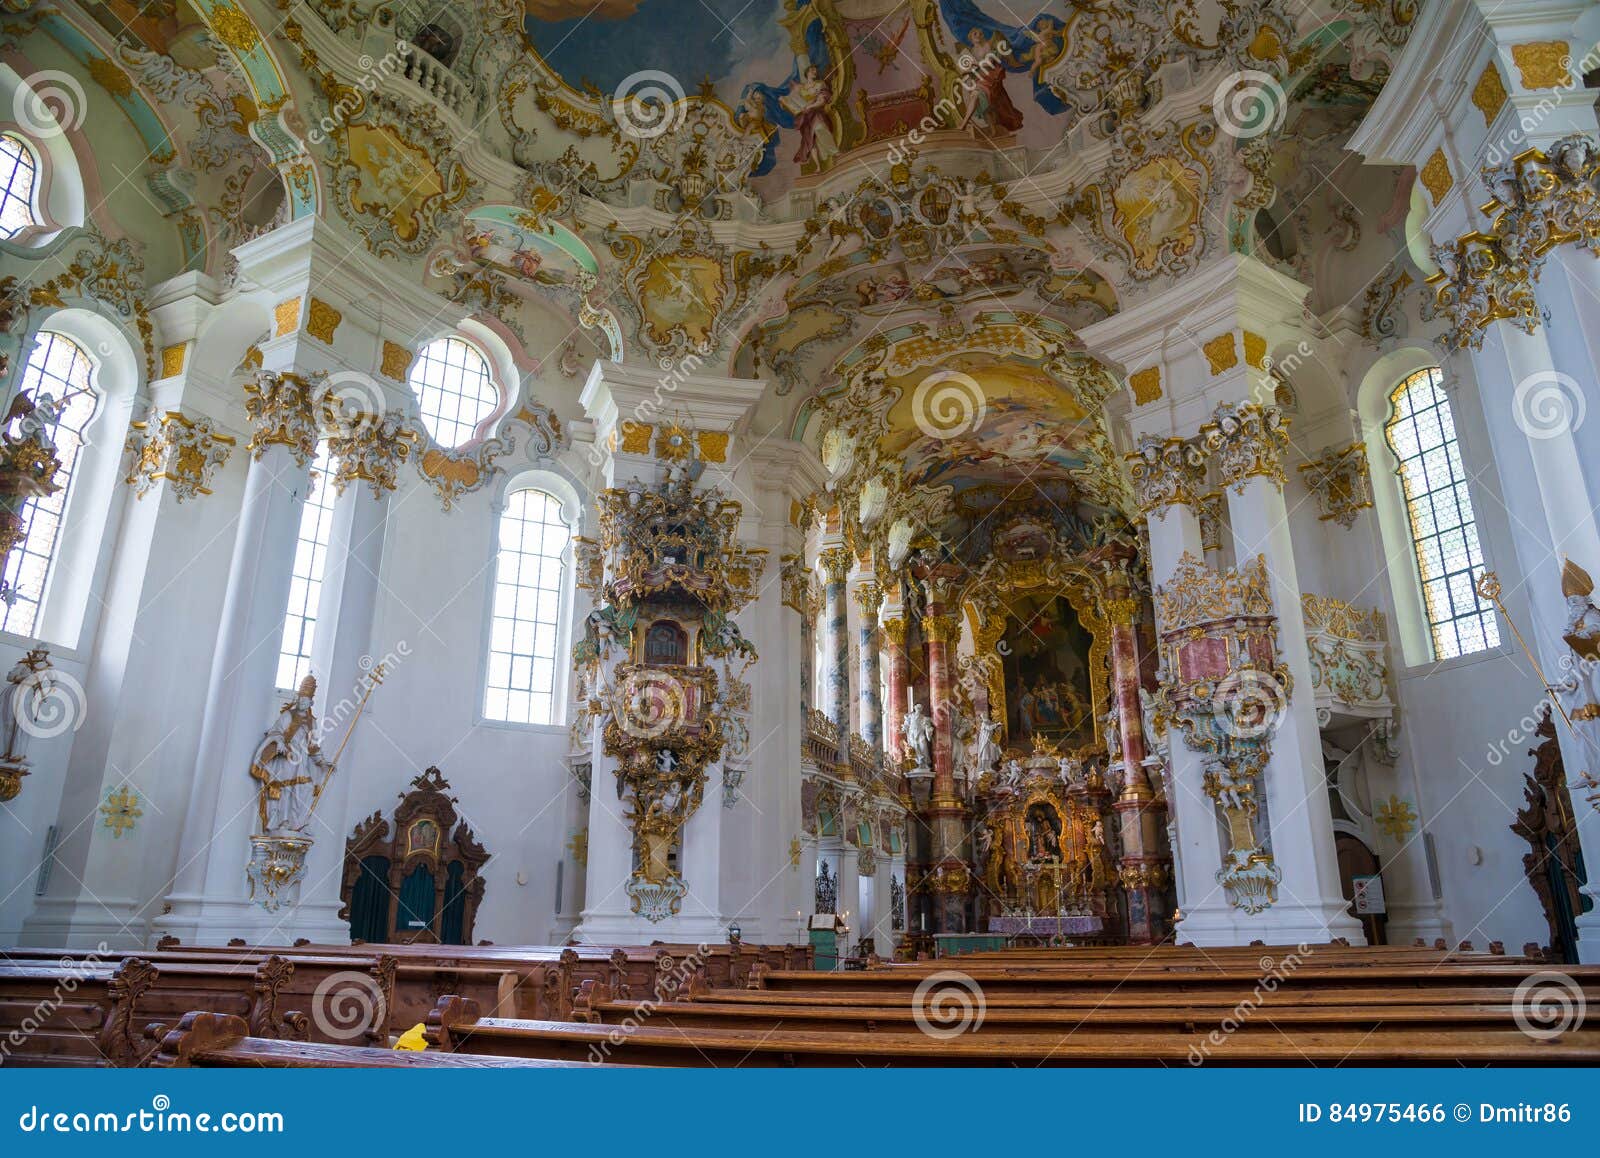 Pilgrimage Church of Wies. Interior View. Bavaria, Germany. Editorial Photo  - Image of baroque, sculpture: 84975466